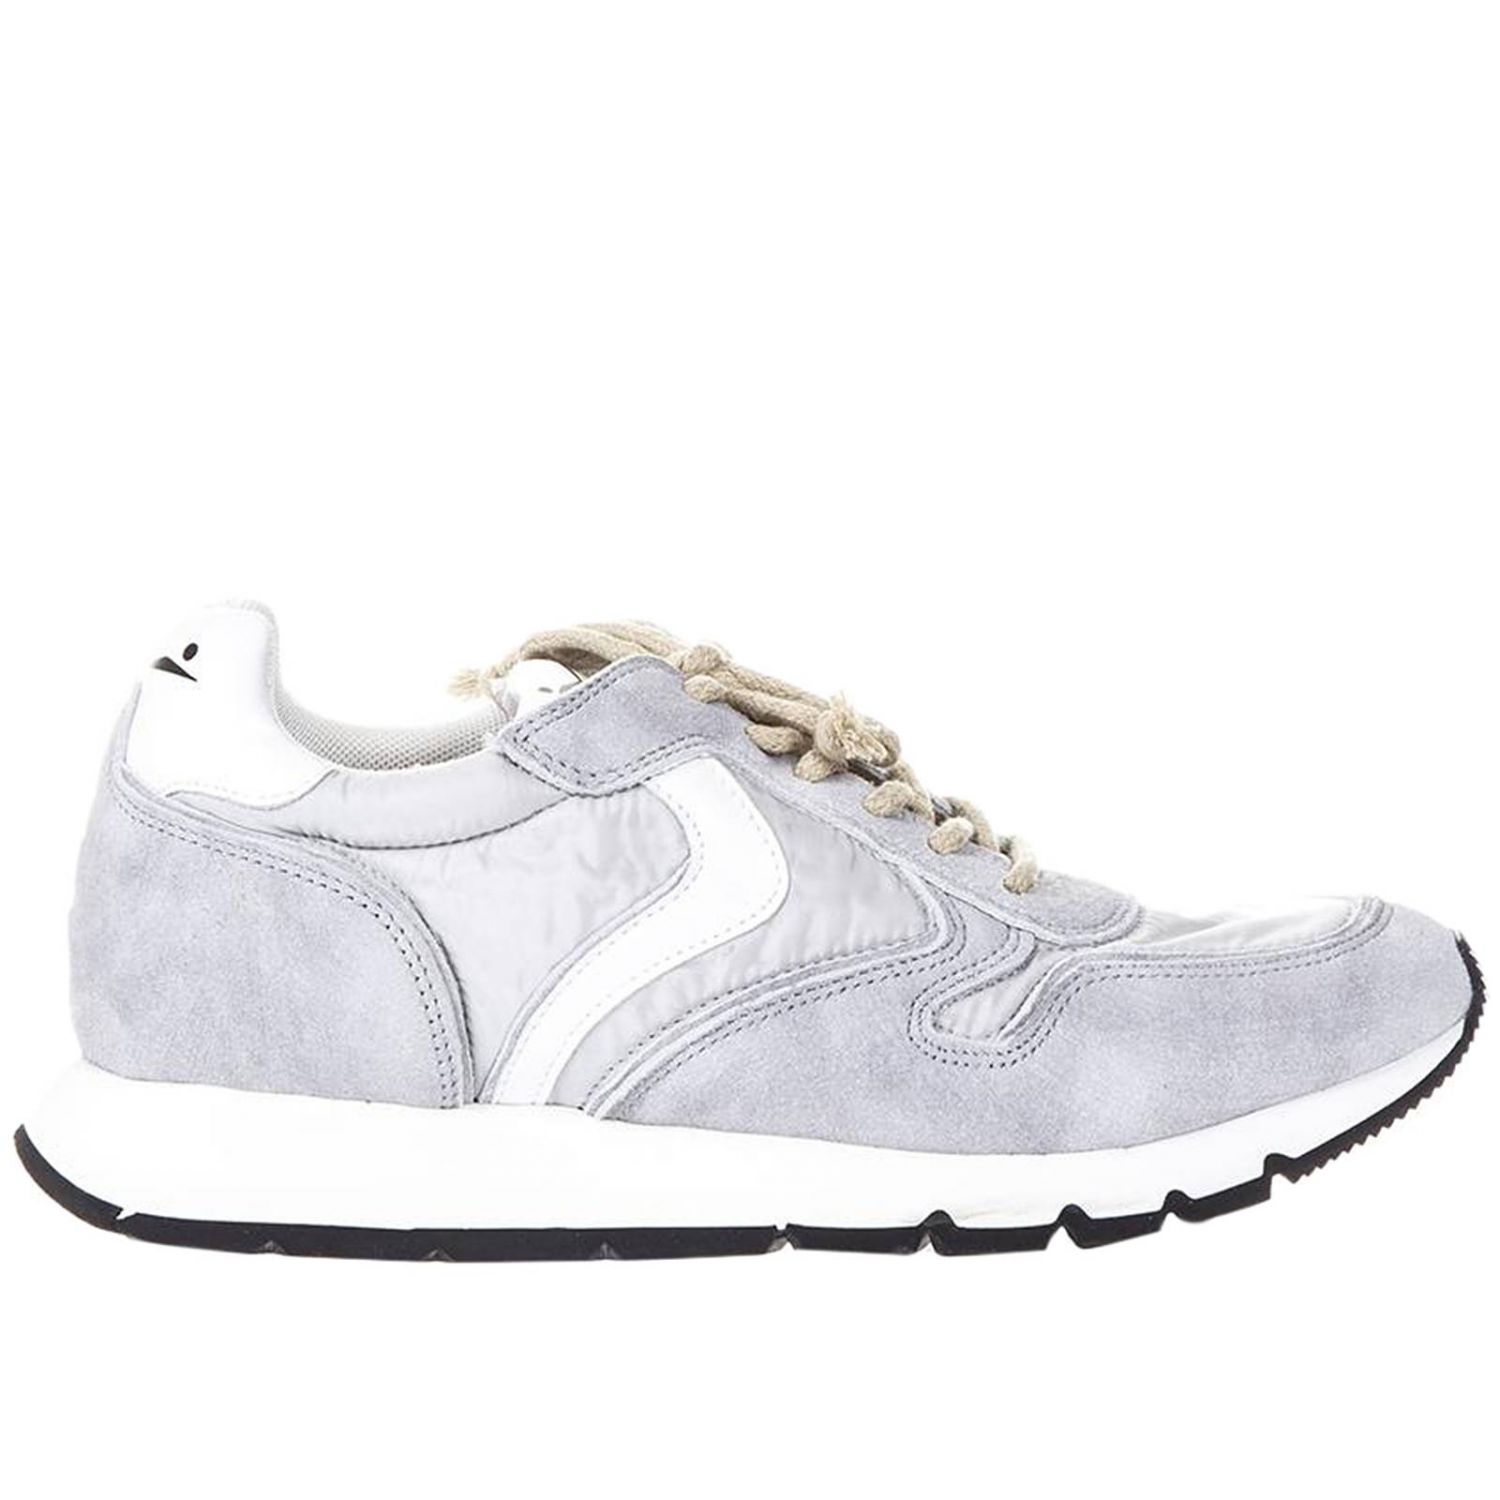 Voile Blanche Outlet: Shoes women | Sneakers Voile Blanche Women Ice ...